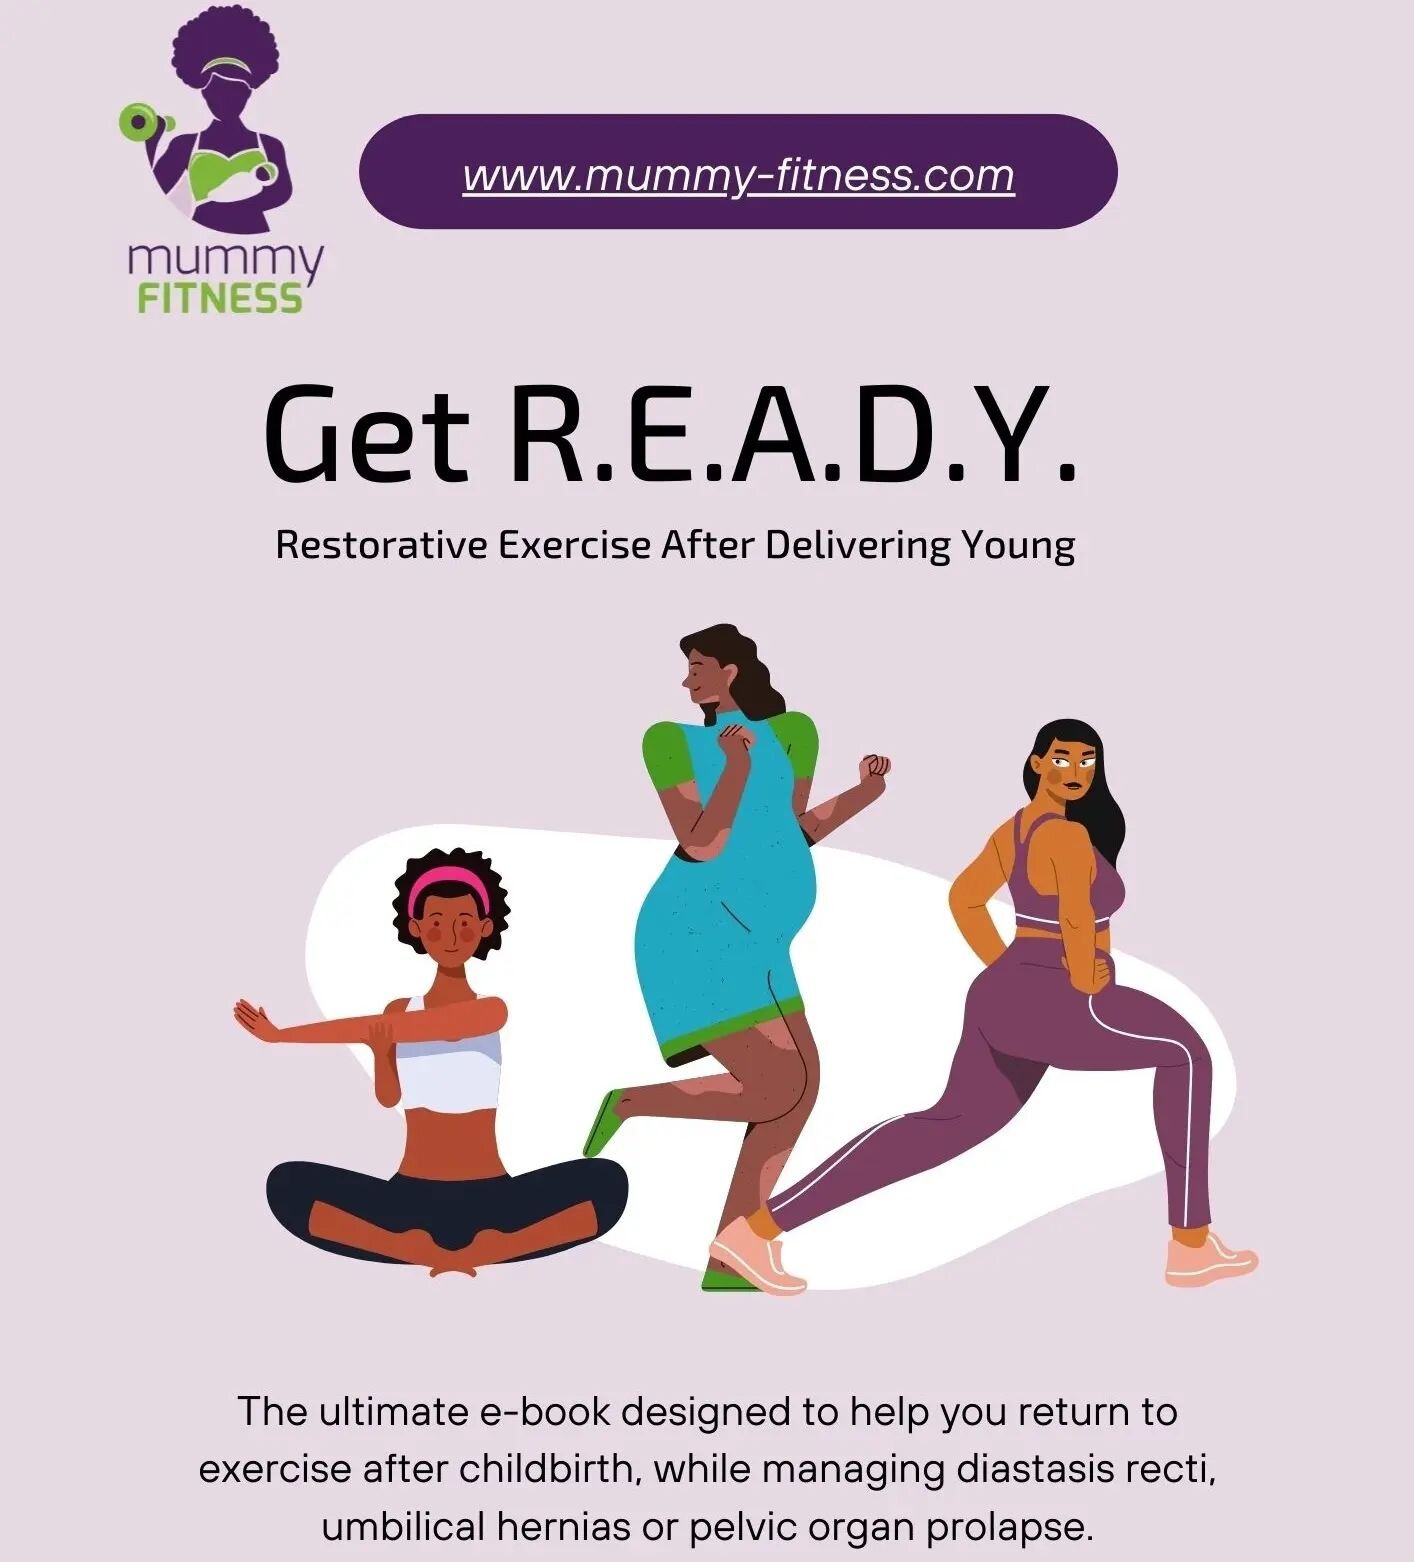 Get READY! Beginning on Monday, January 16 I will be hosting a virtual core strengthening program. This program is designed for postpartum people or those struggling with navigating diastasis recti, exercising with hernias or pelvic organ prolapse.

